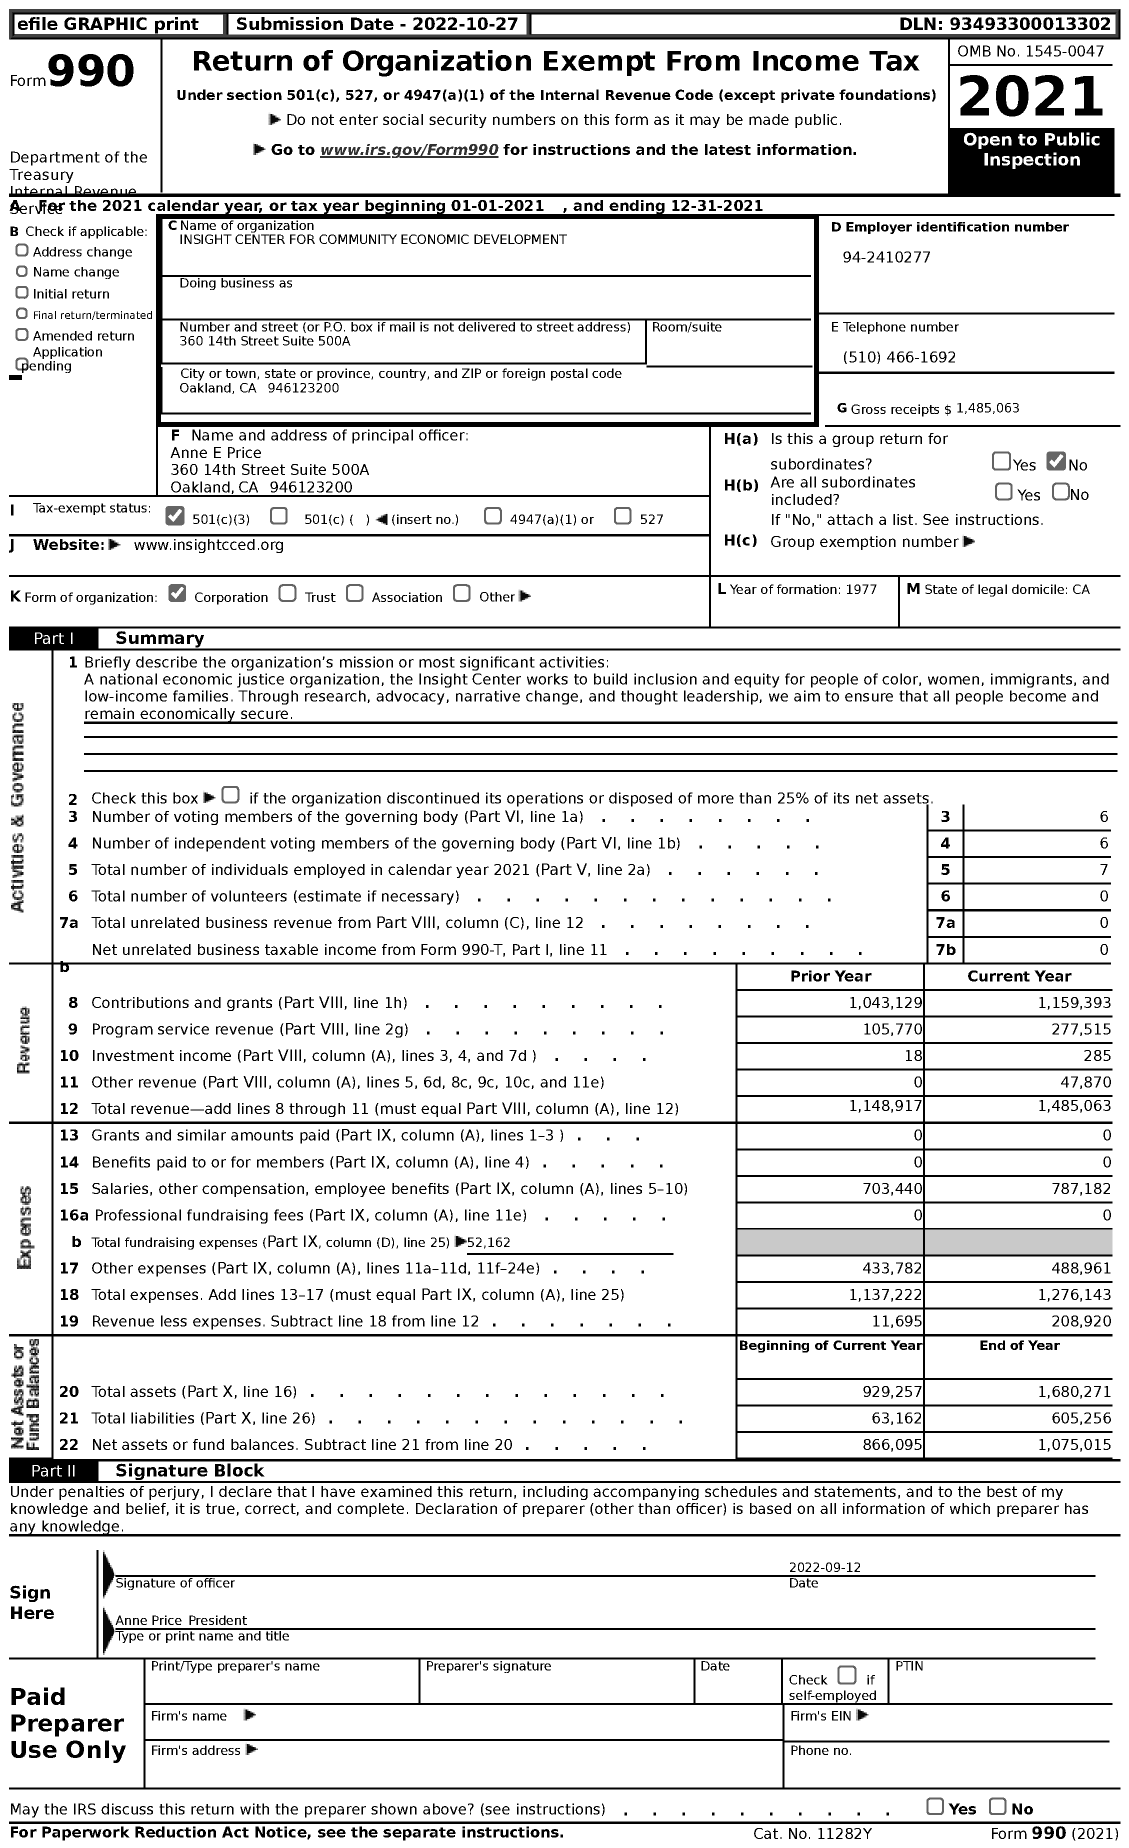 Image of first page of 2021 Form 990 for Insight Center for Community Economic